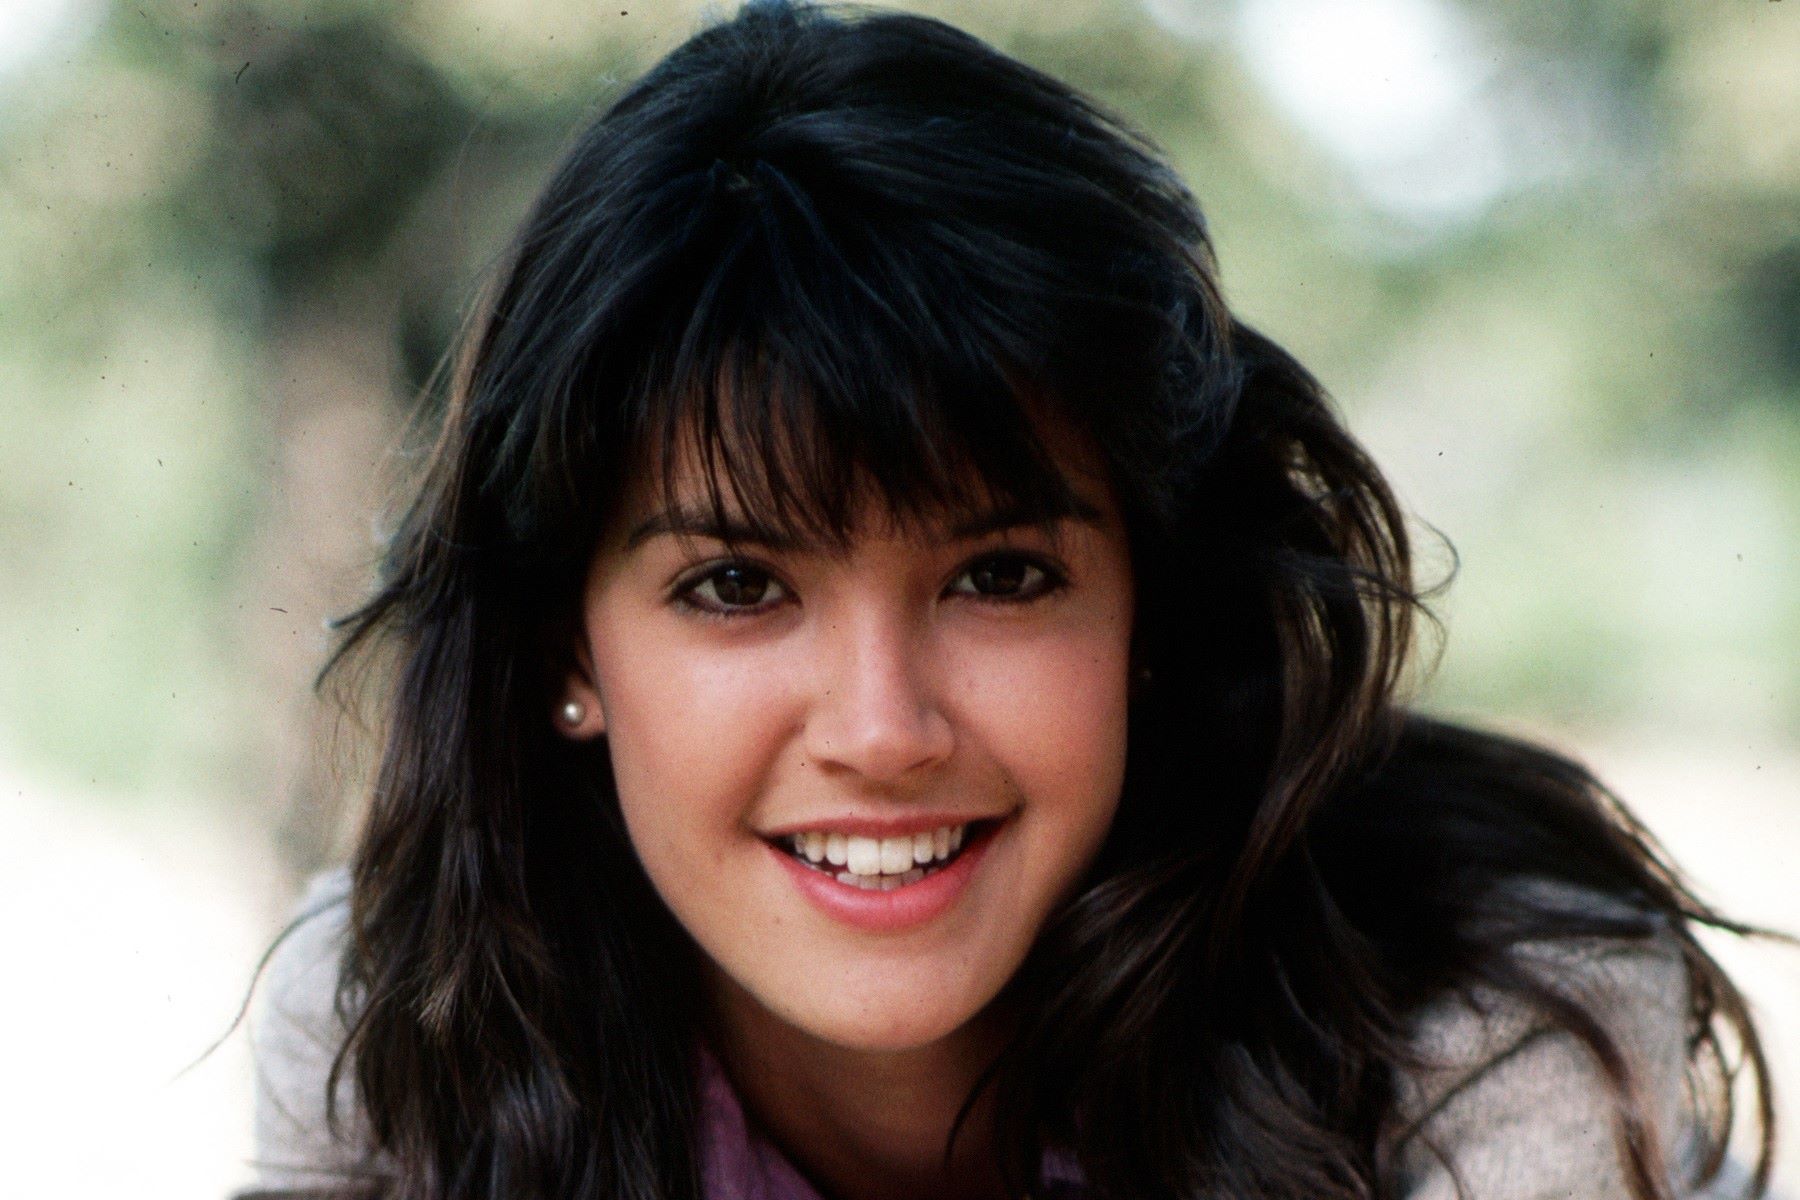 The Surprising Truth About Phoebe Cates: Her Secret Family And Famous Siblings!